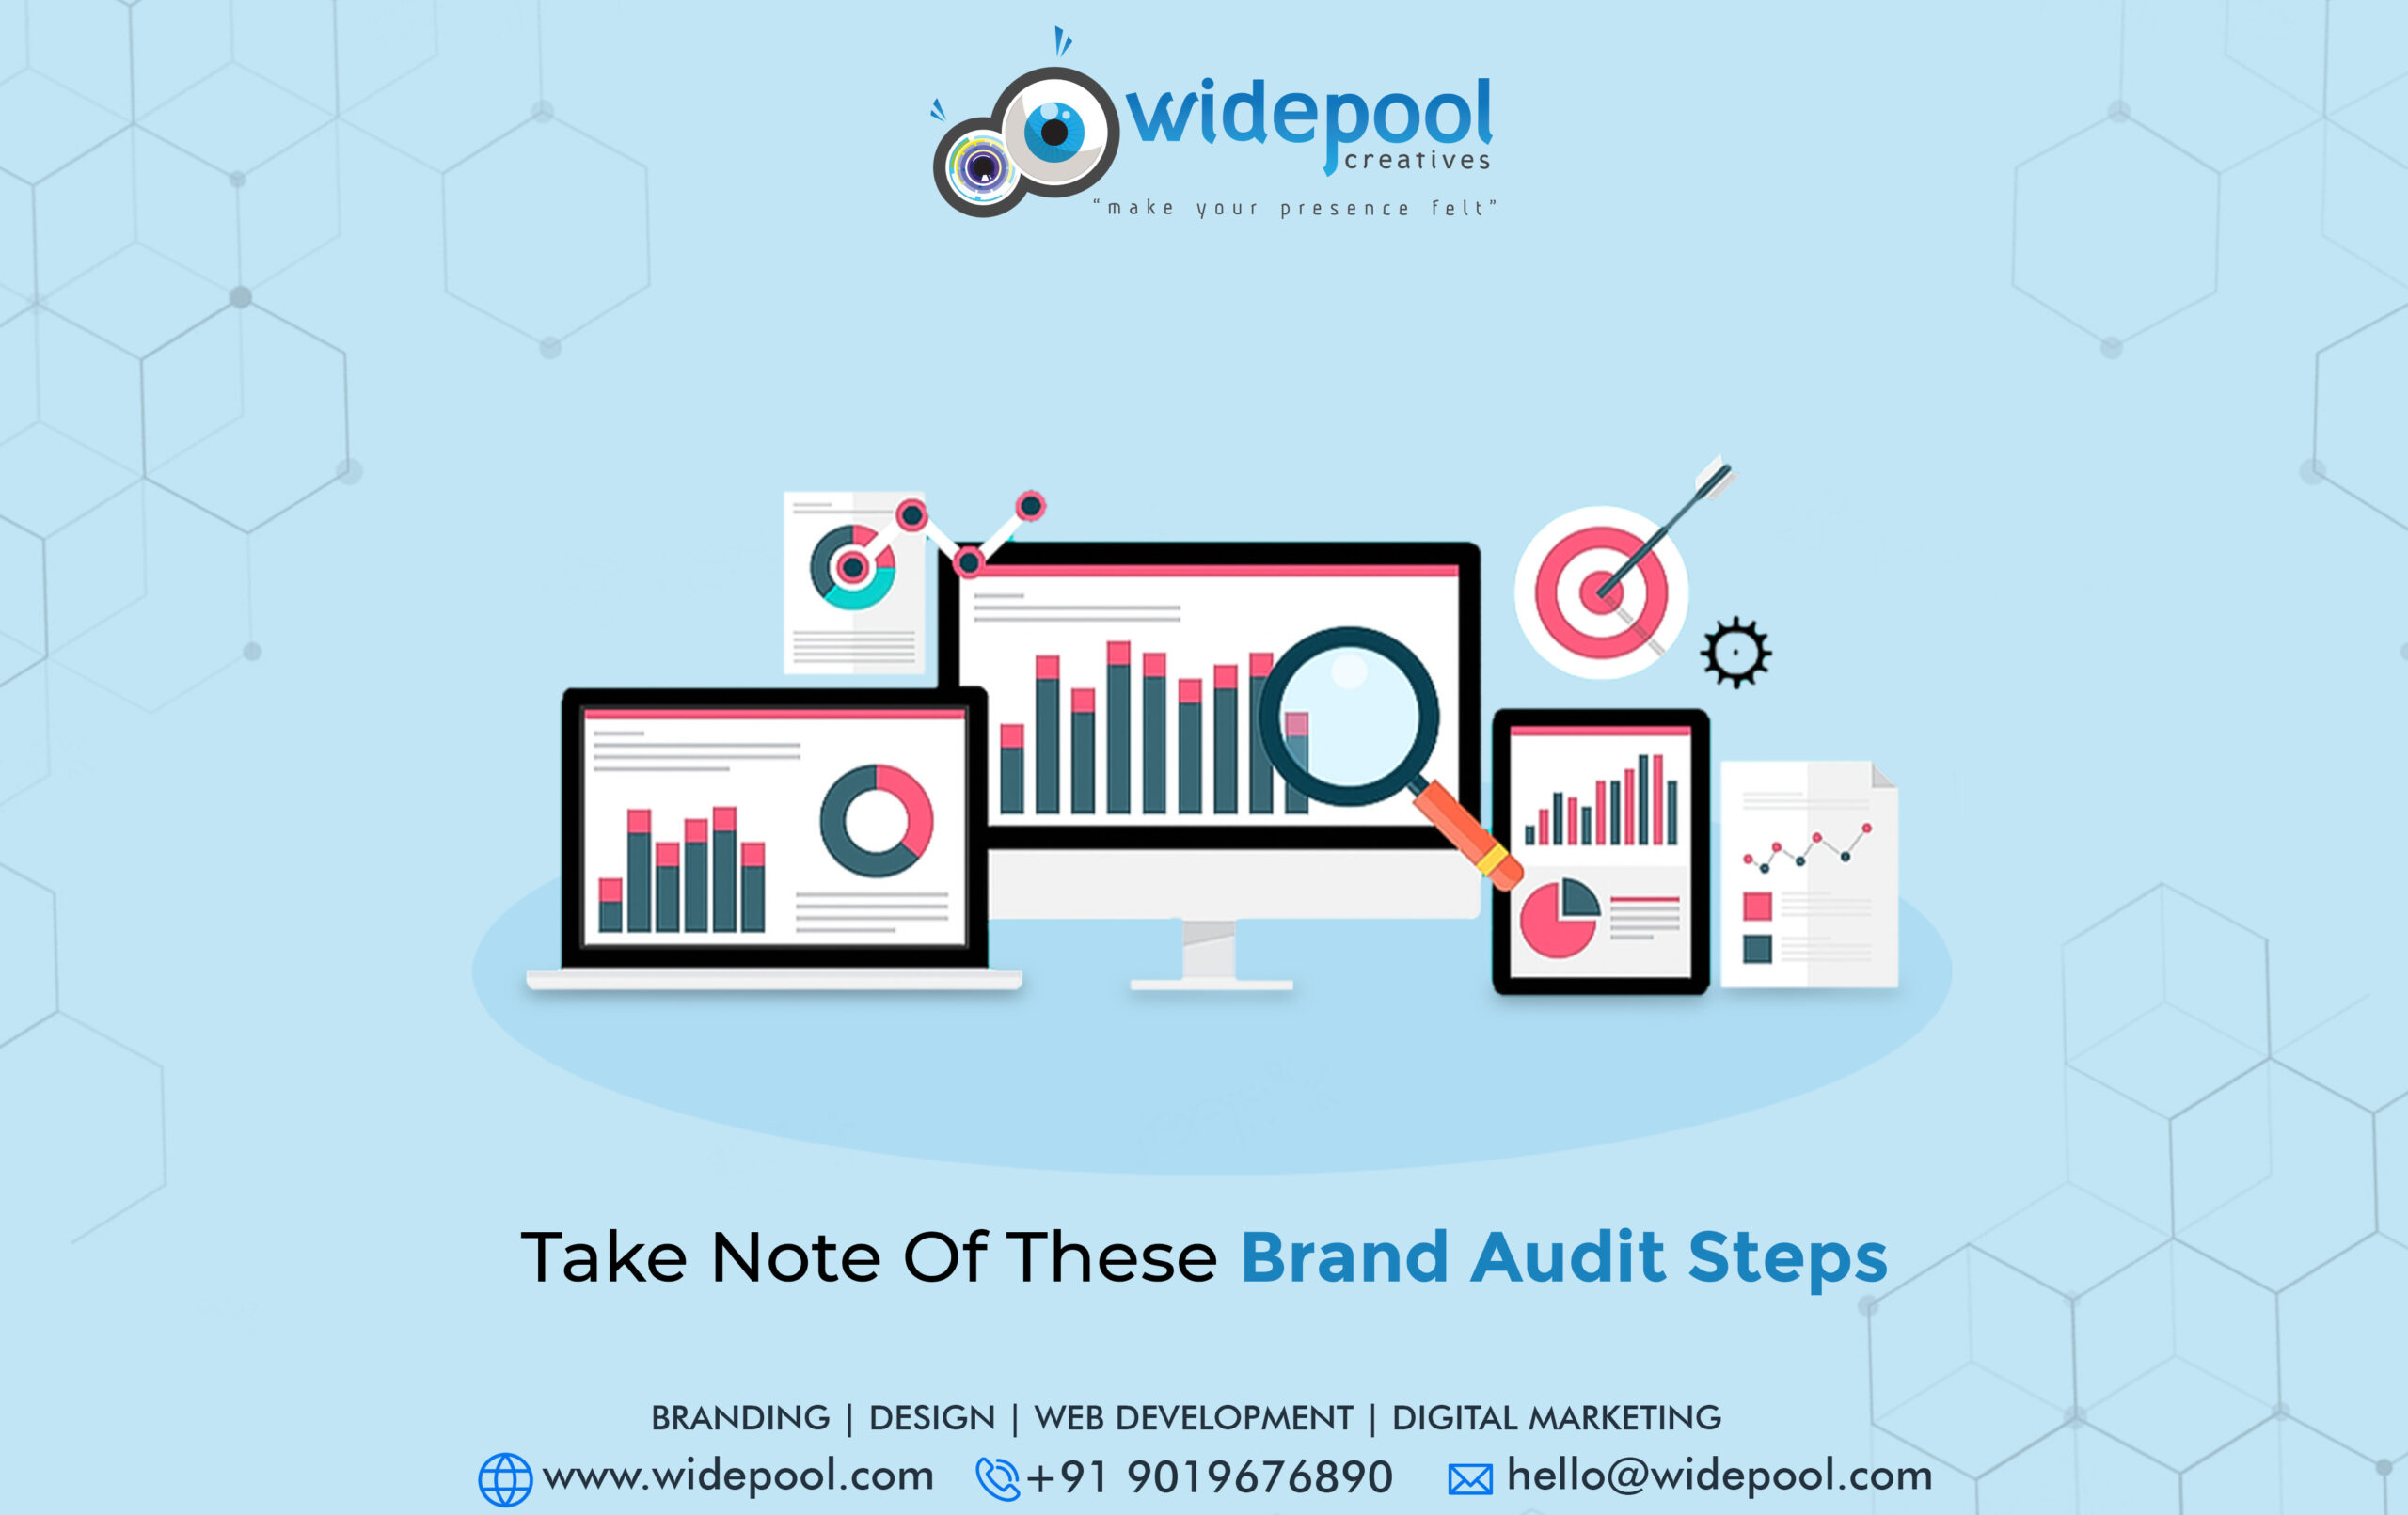 Take Note of These Brand Audit Steps